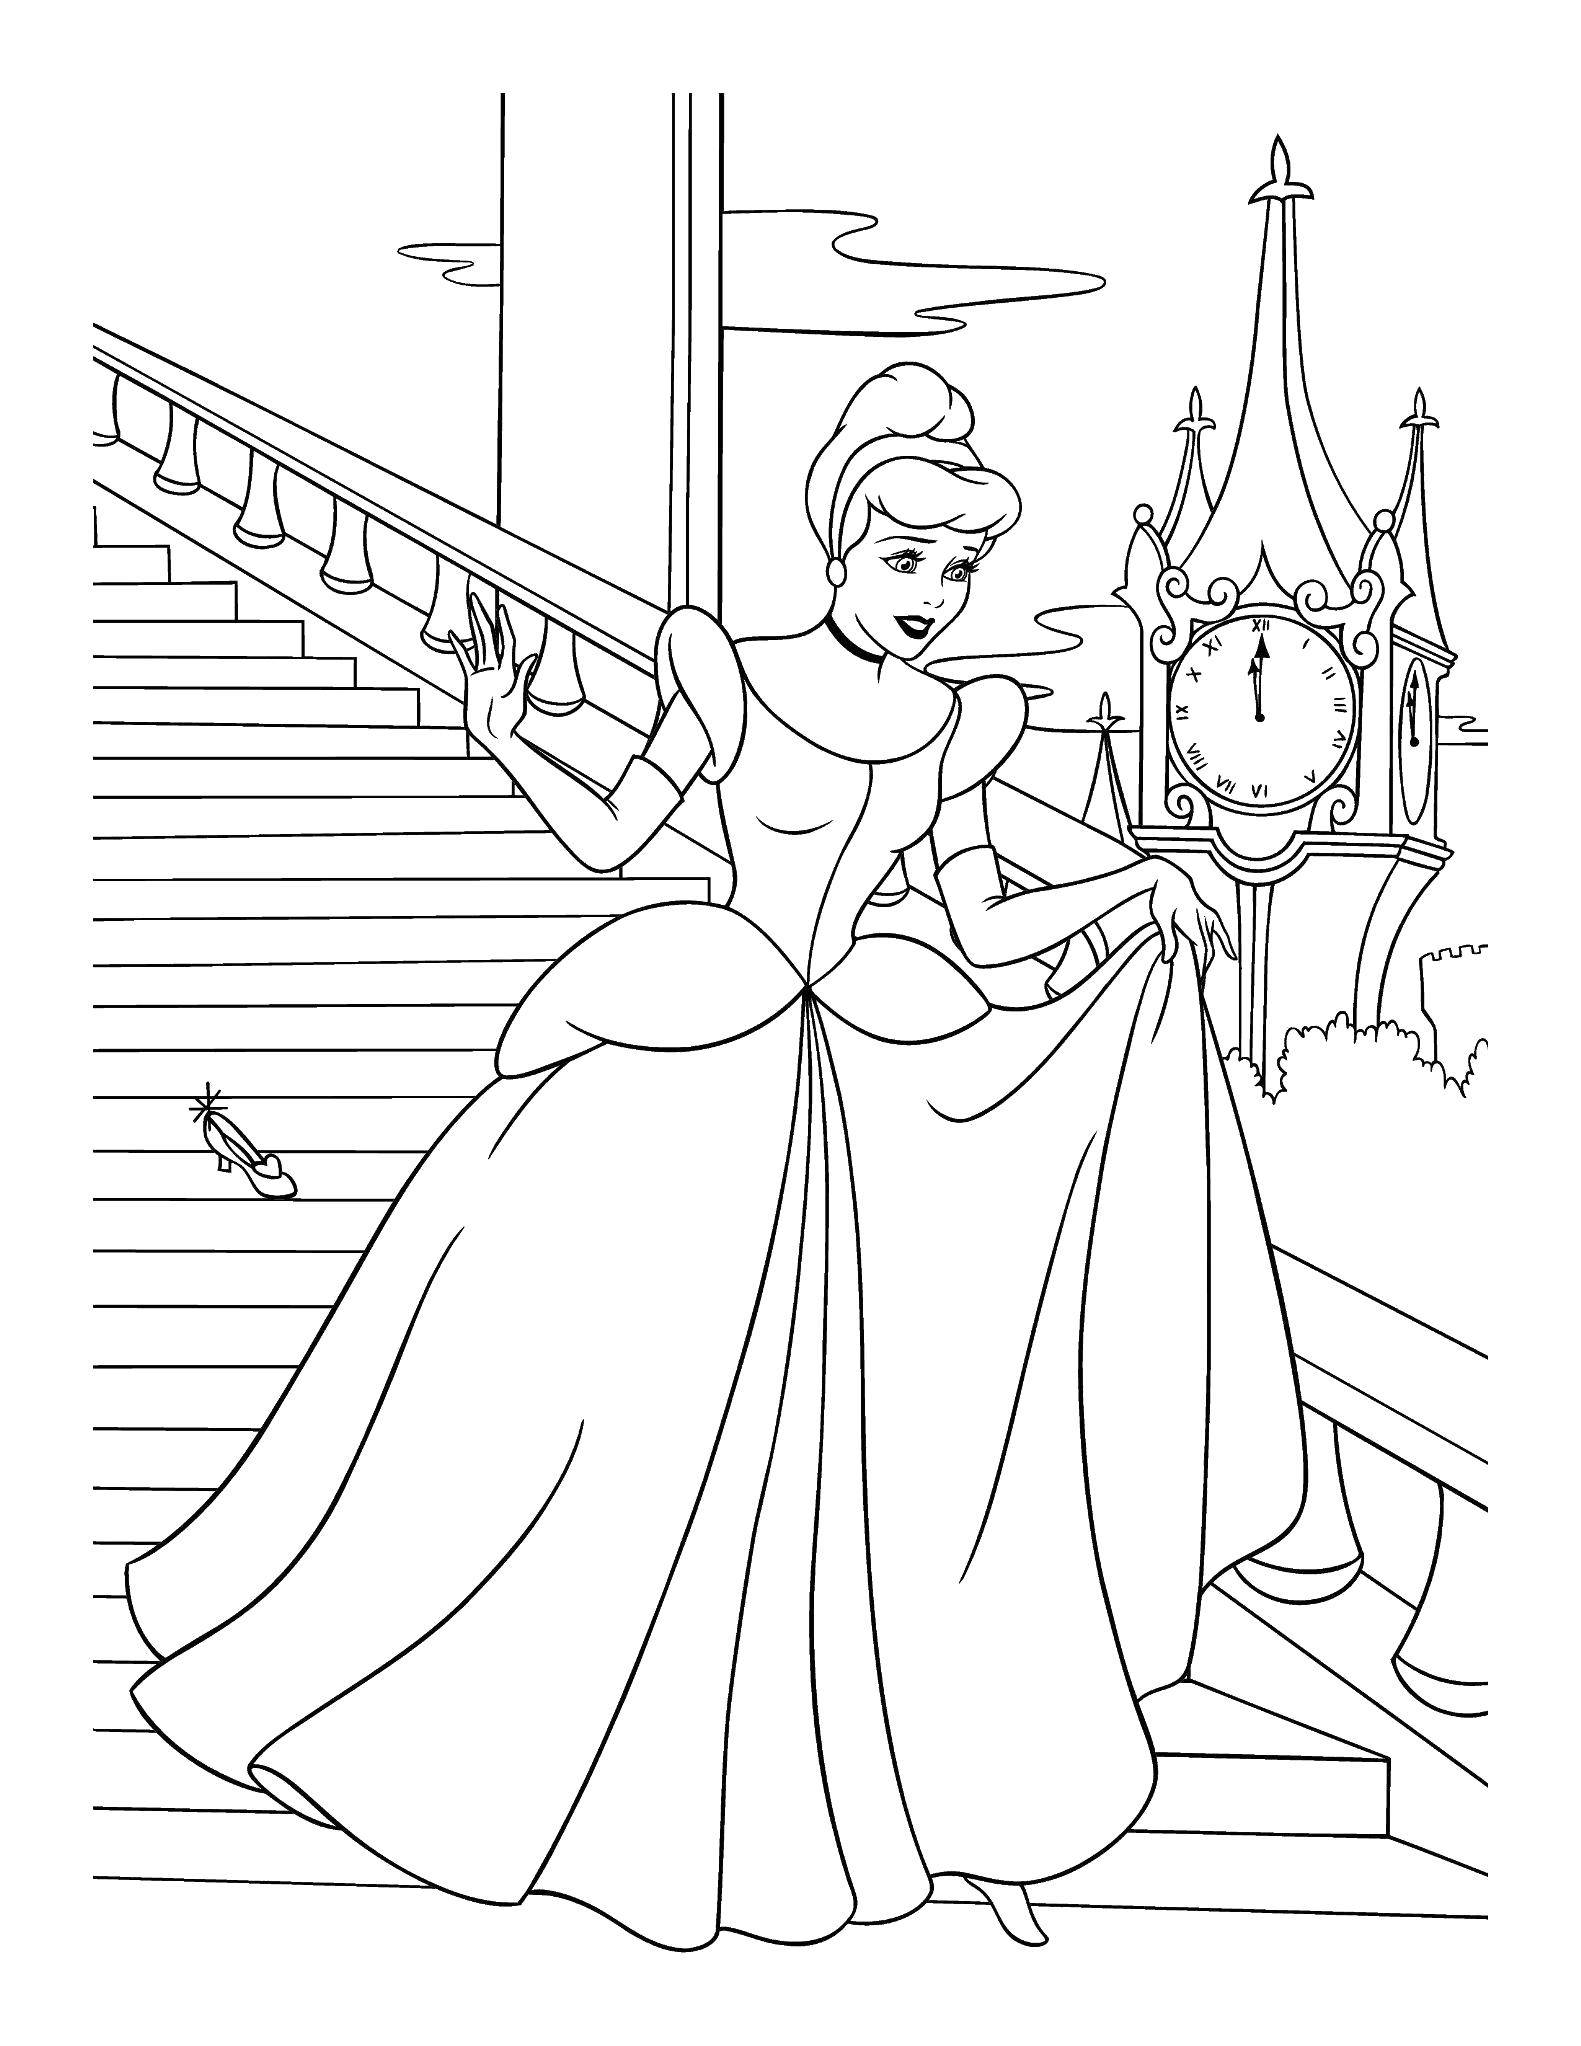 Coloring Cinderella lost a Shoe in a hurry. Category Disney coloring pages. Tags:  Disney, Cinderella.